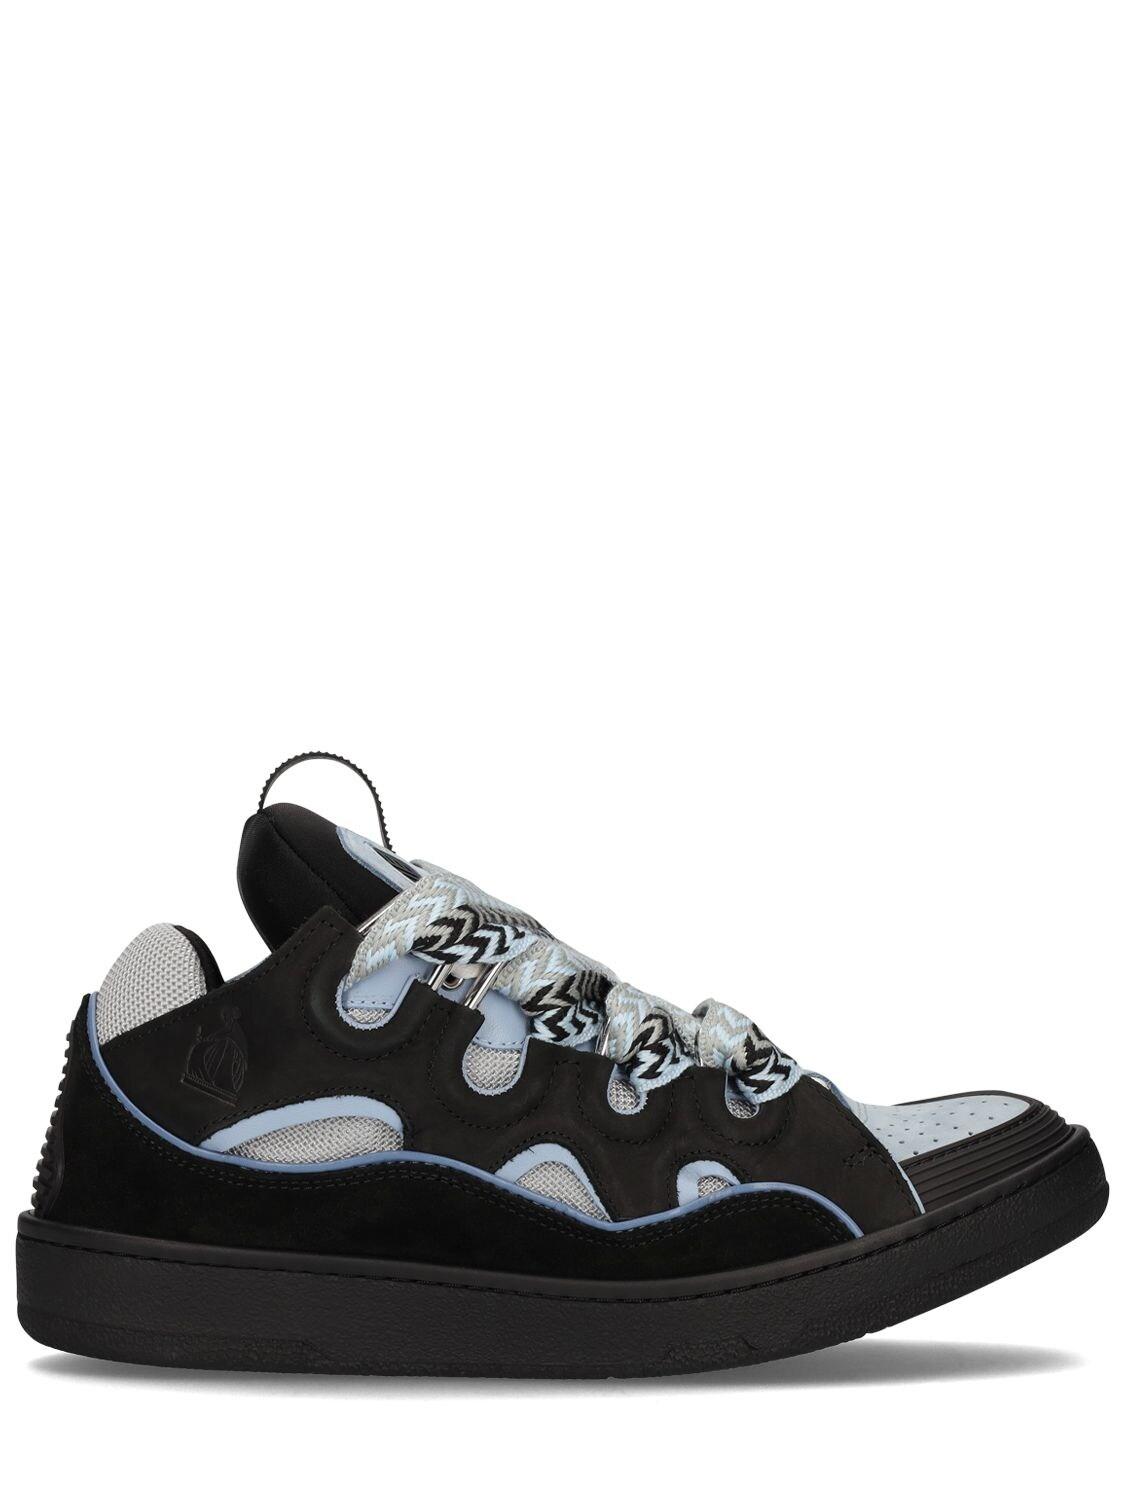 Lanvin Curb Leather Sneakers in Black for Men | Lyst